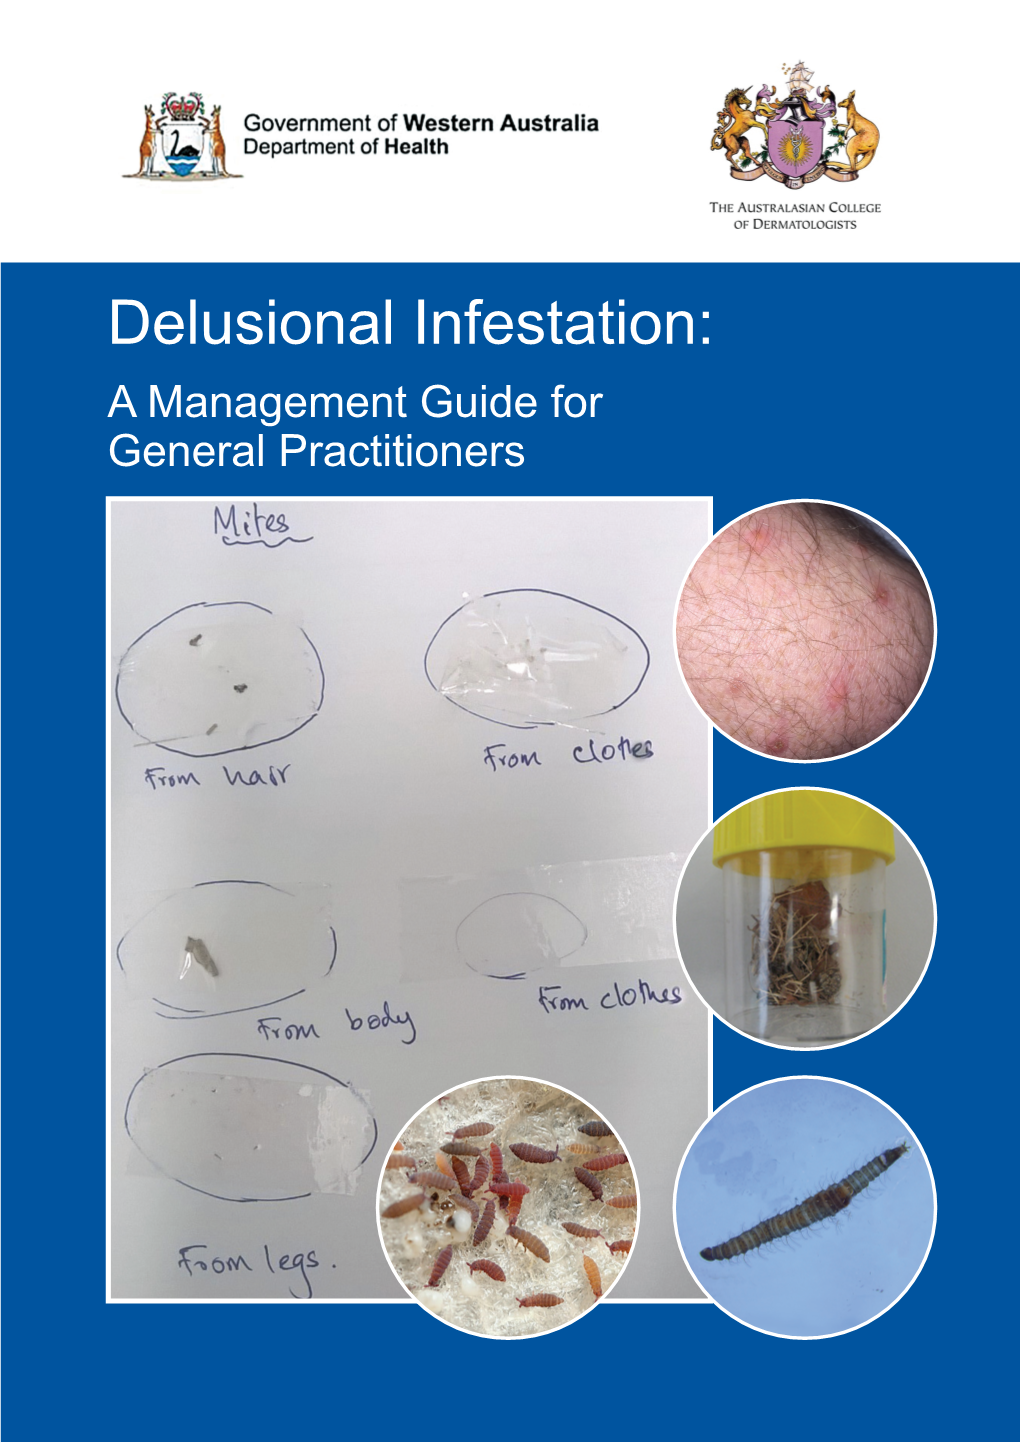 Delusional Infestation: a Management Guide for General Practitioners